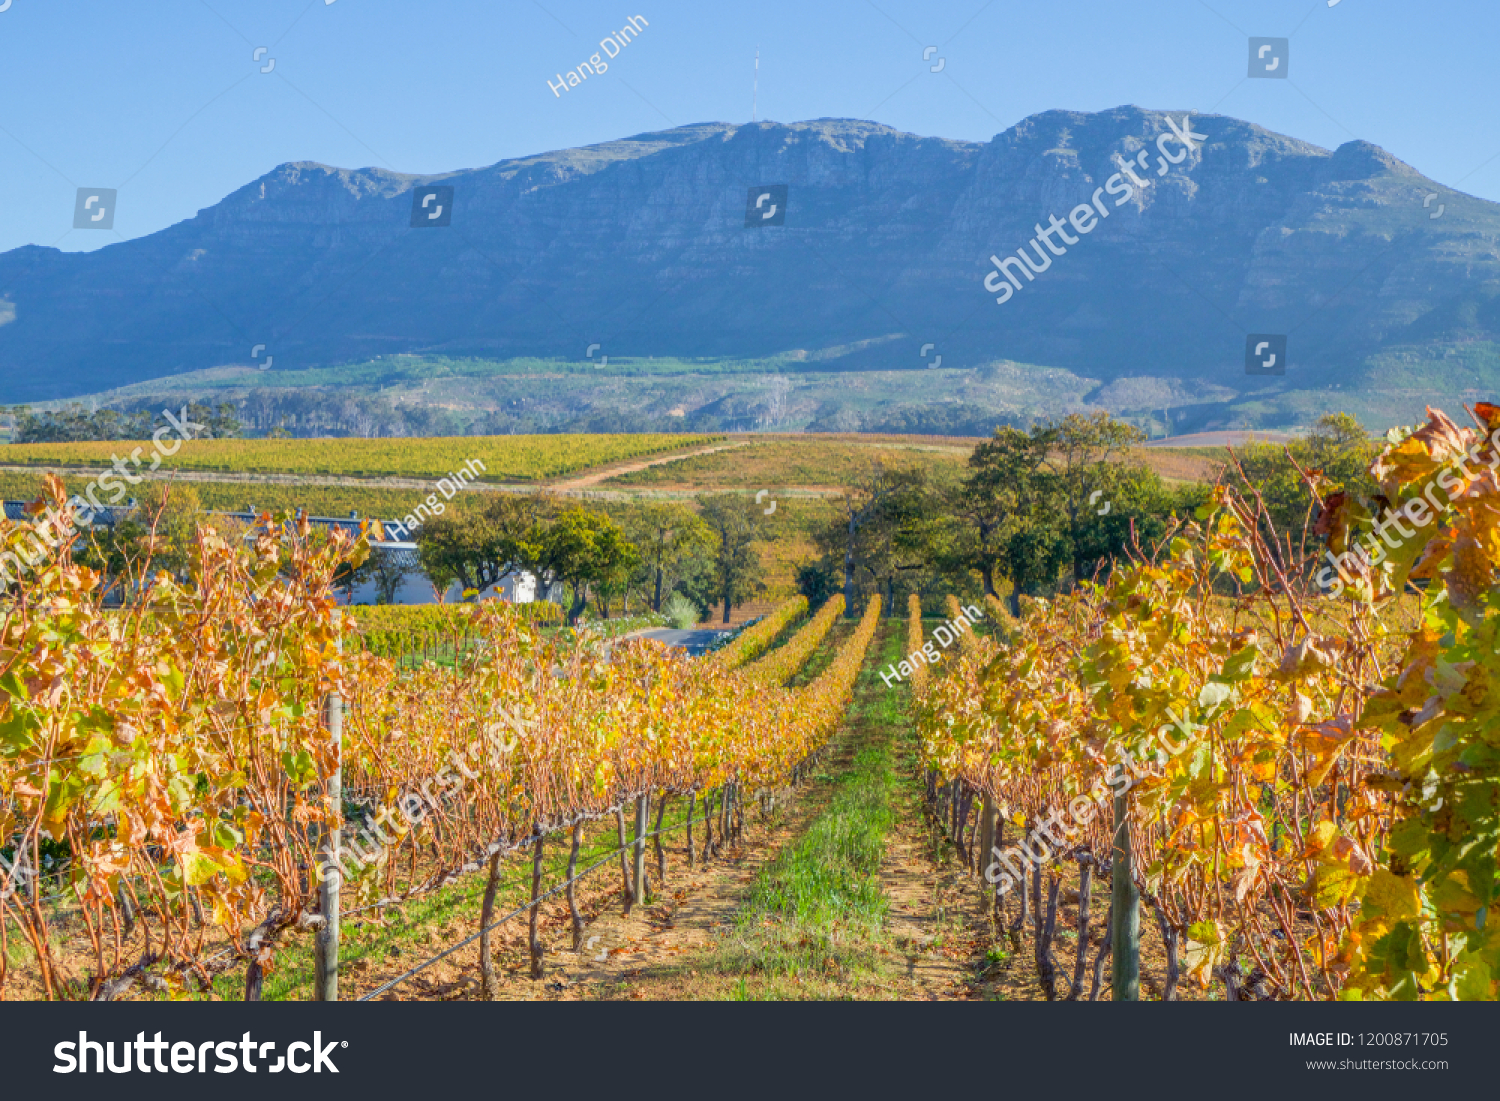 Constantia, the famous wine-producing suburb of Cape Town, South Africa in the fall season.  #1200871705